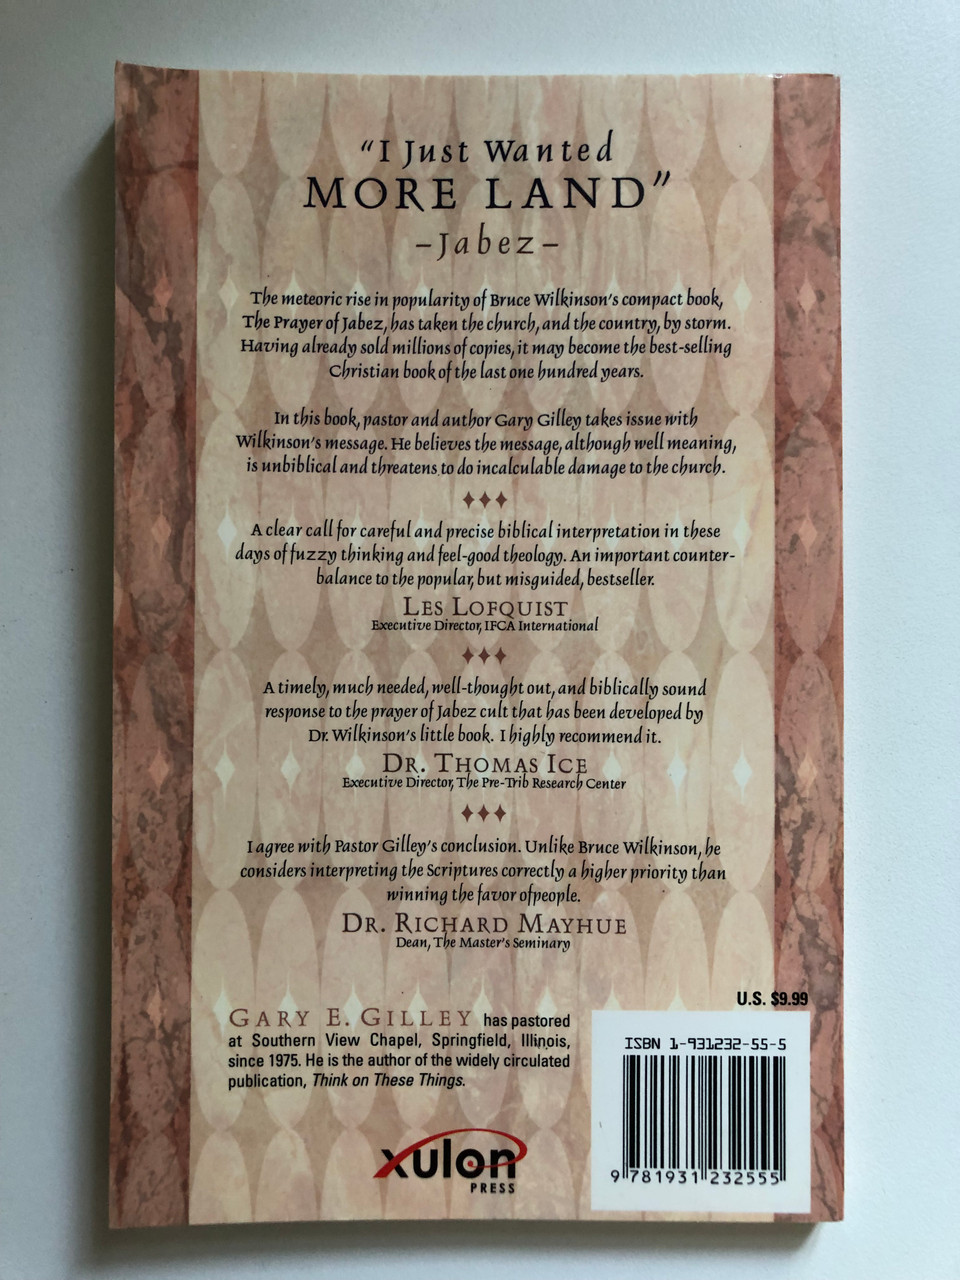 I_Just_Wanted_More_Land_by_Gary_Gilley_A_careful_analysis_of_Bruce_Wilkinsons_best-selling_book_The_Prayer_of_Jabez_Precise_biblical_interpretation_Publisher_Xul_1__06249.1691330780.1280.1280.JPG (960×1280)